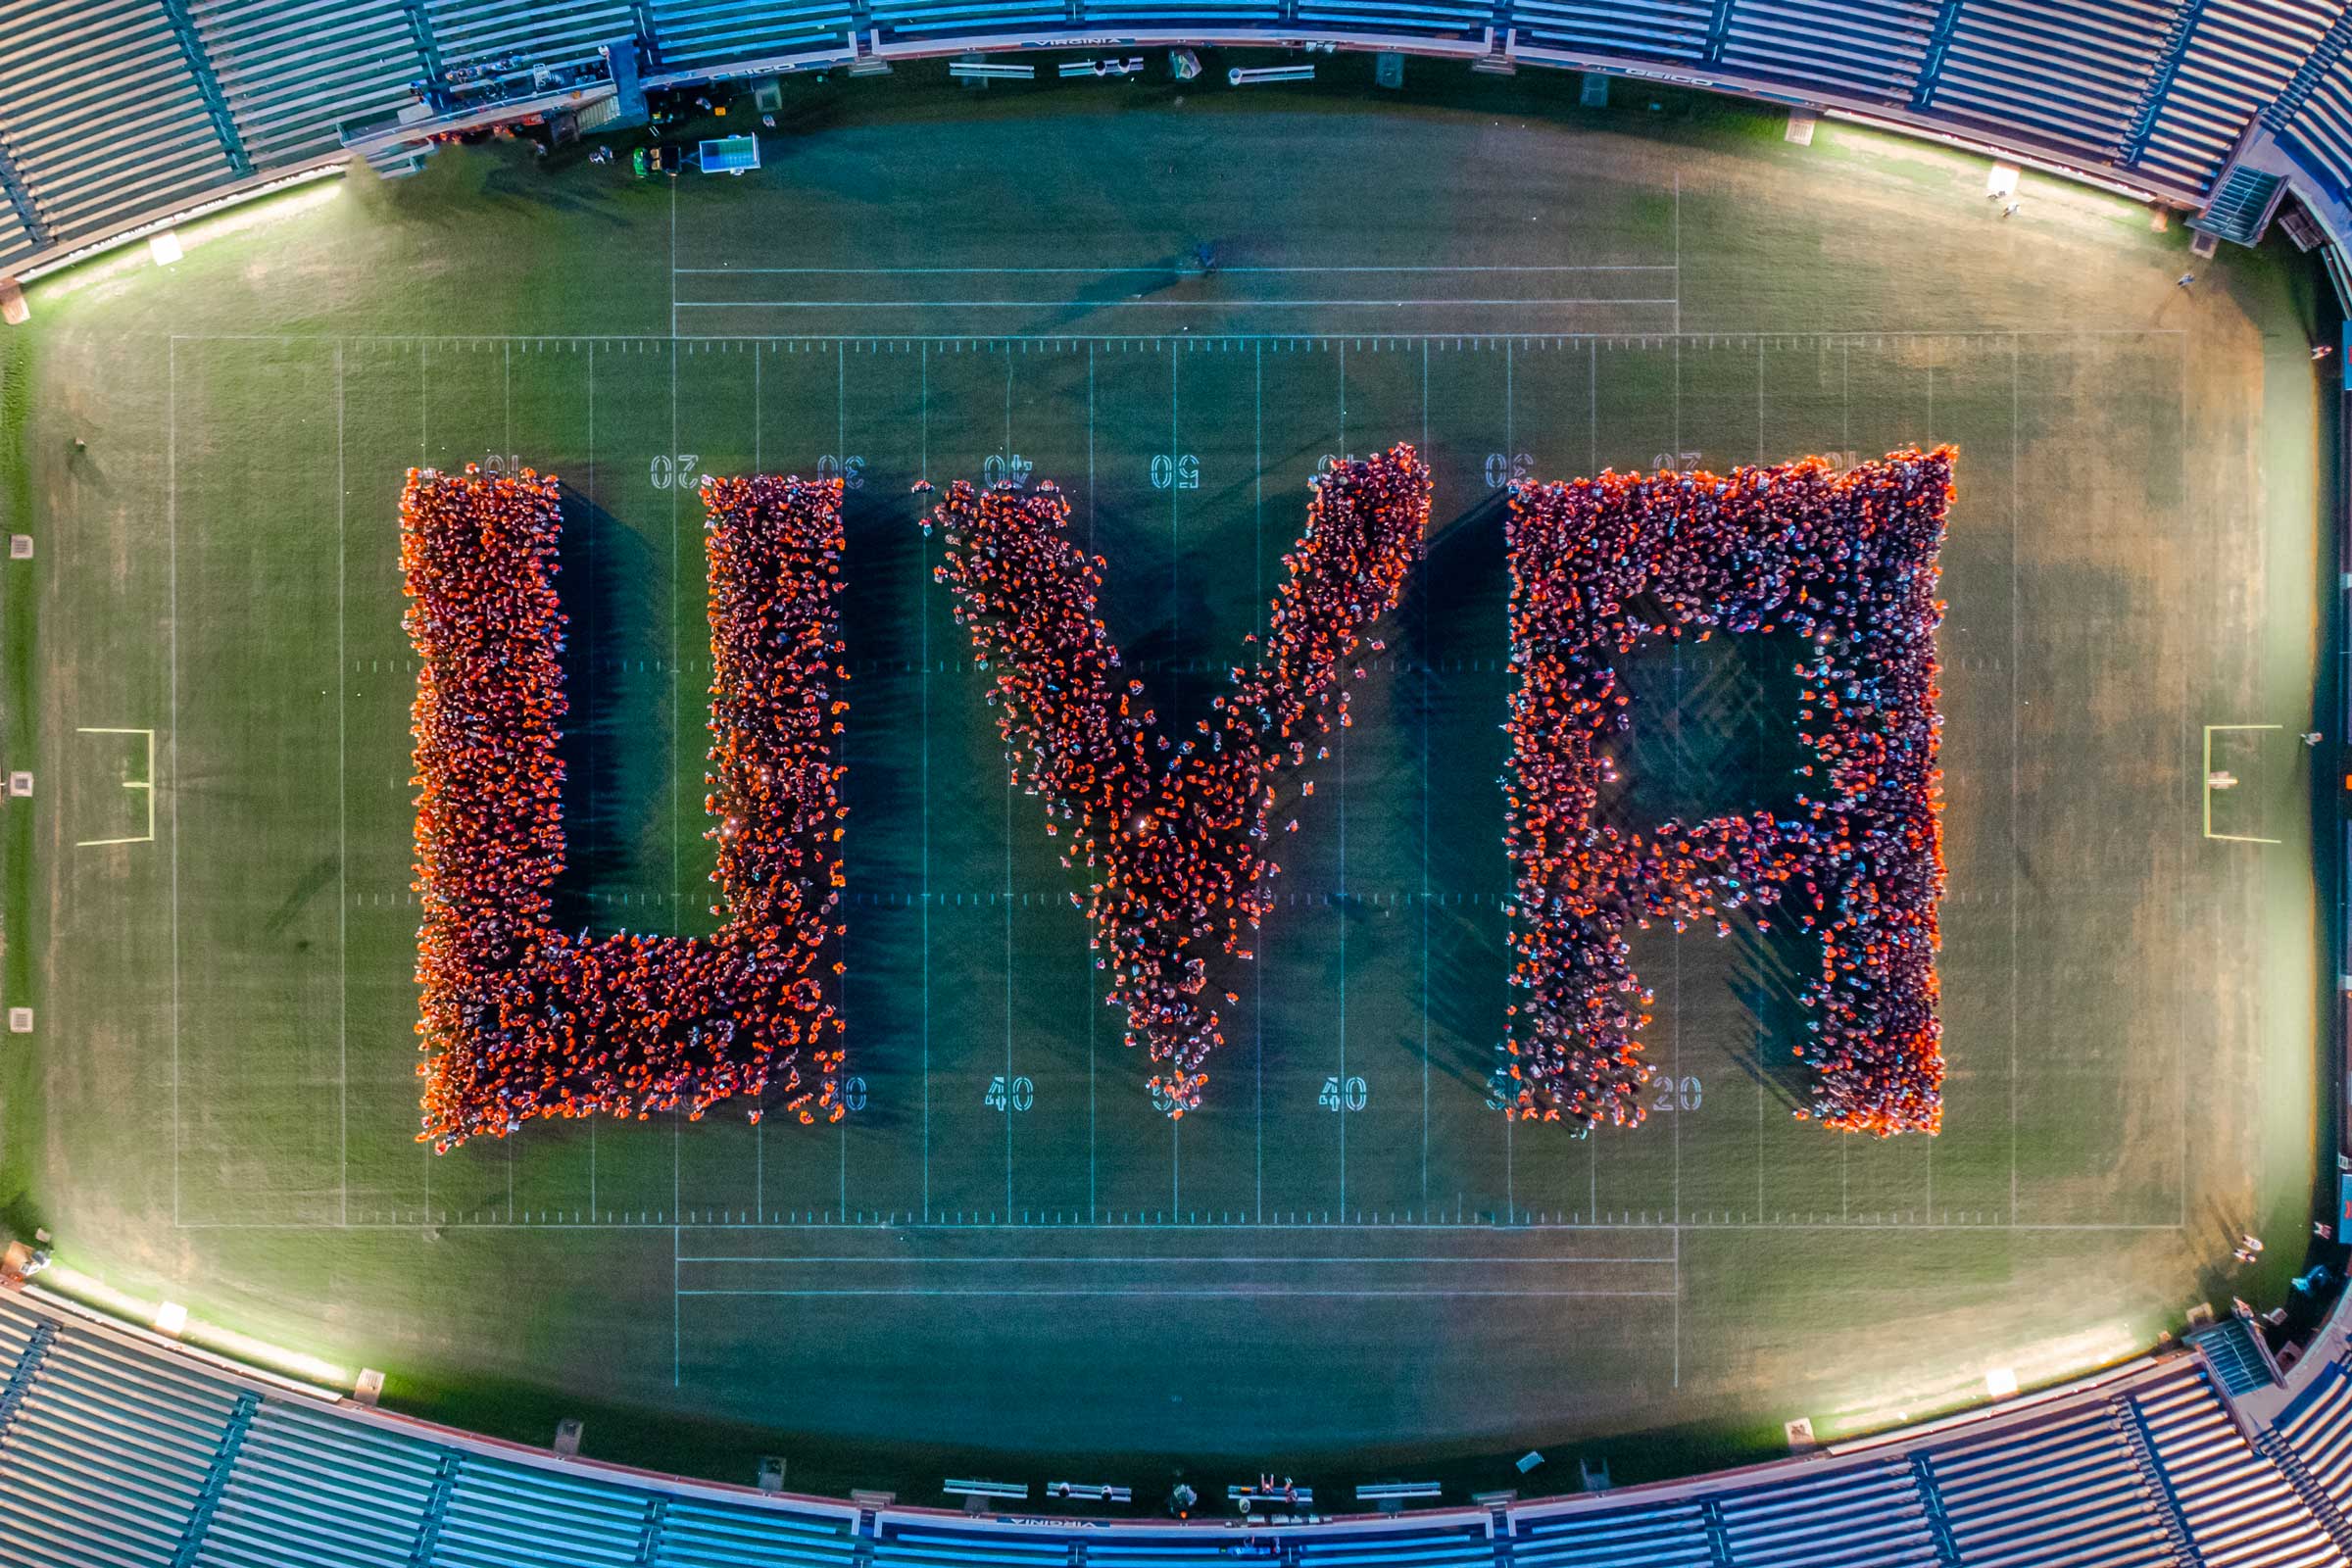 Drone shot of students forming "UVA" on the field